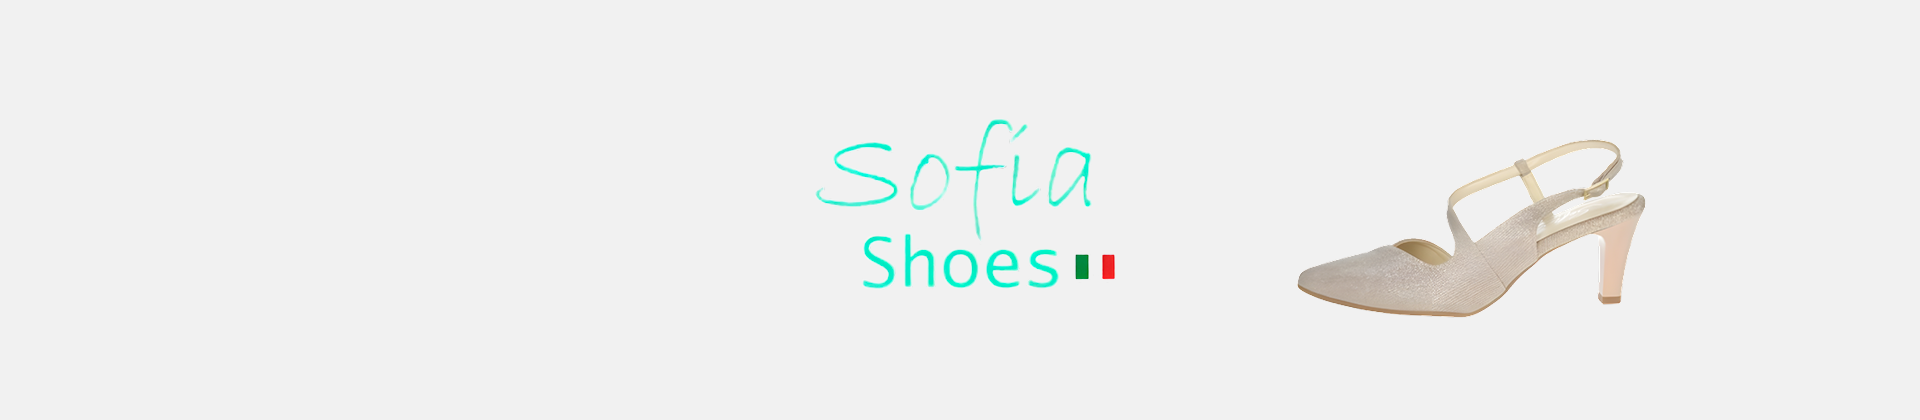 Sofia Shoes | women's sandals at affordable prices